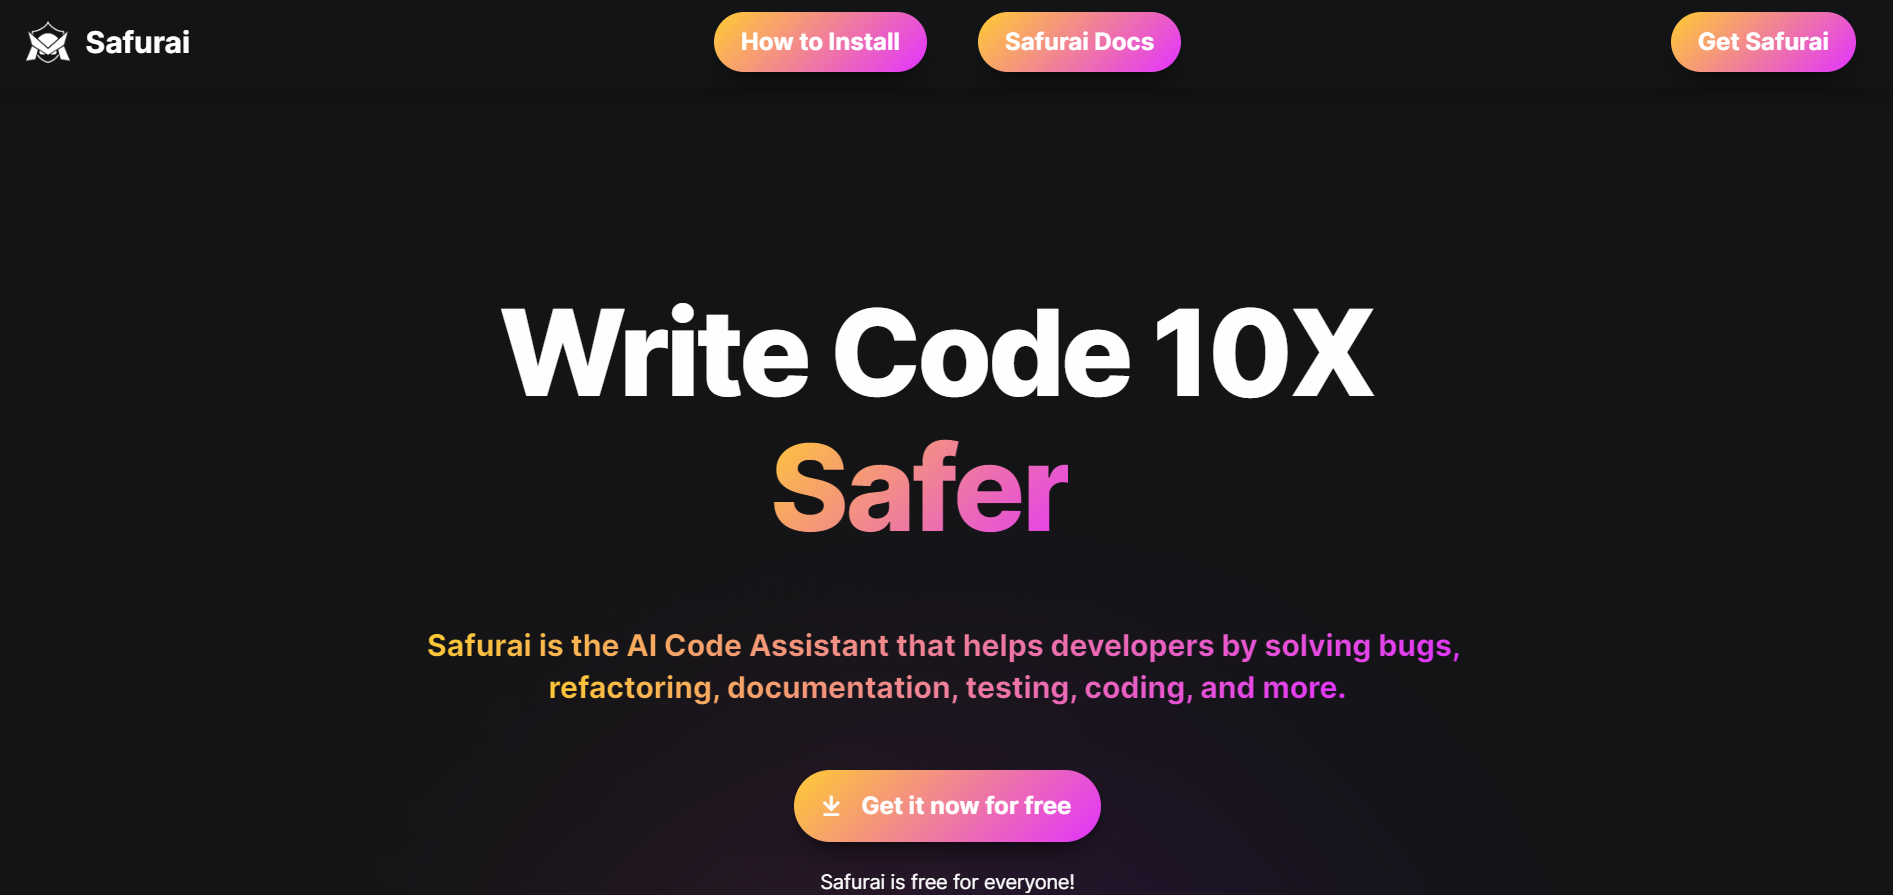 Boost your coding skills with AI-based IDE extension Safurai.com”